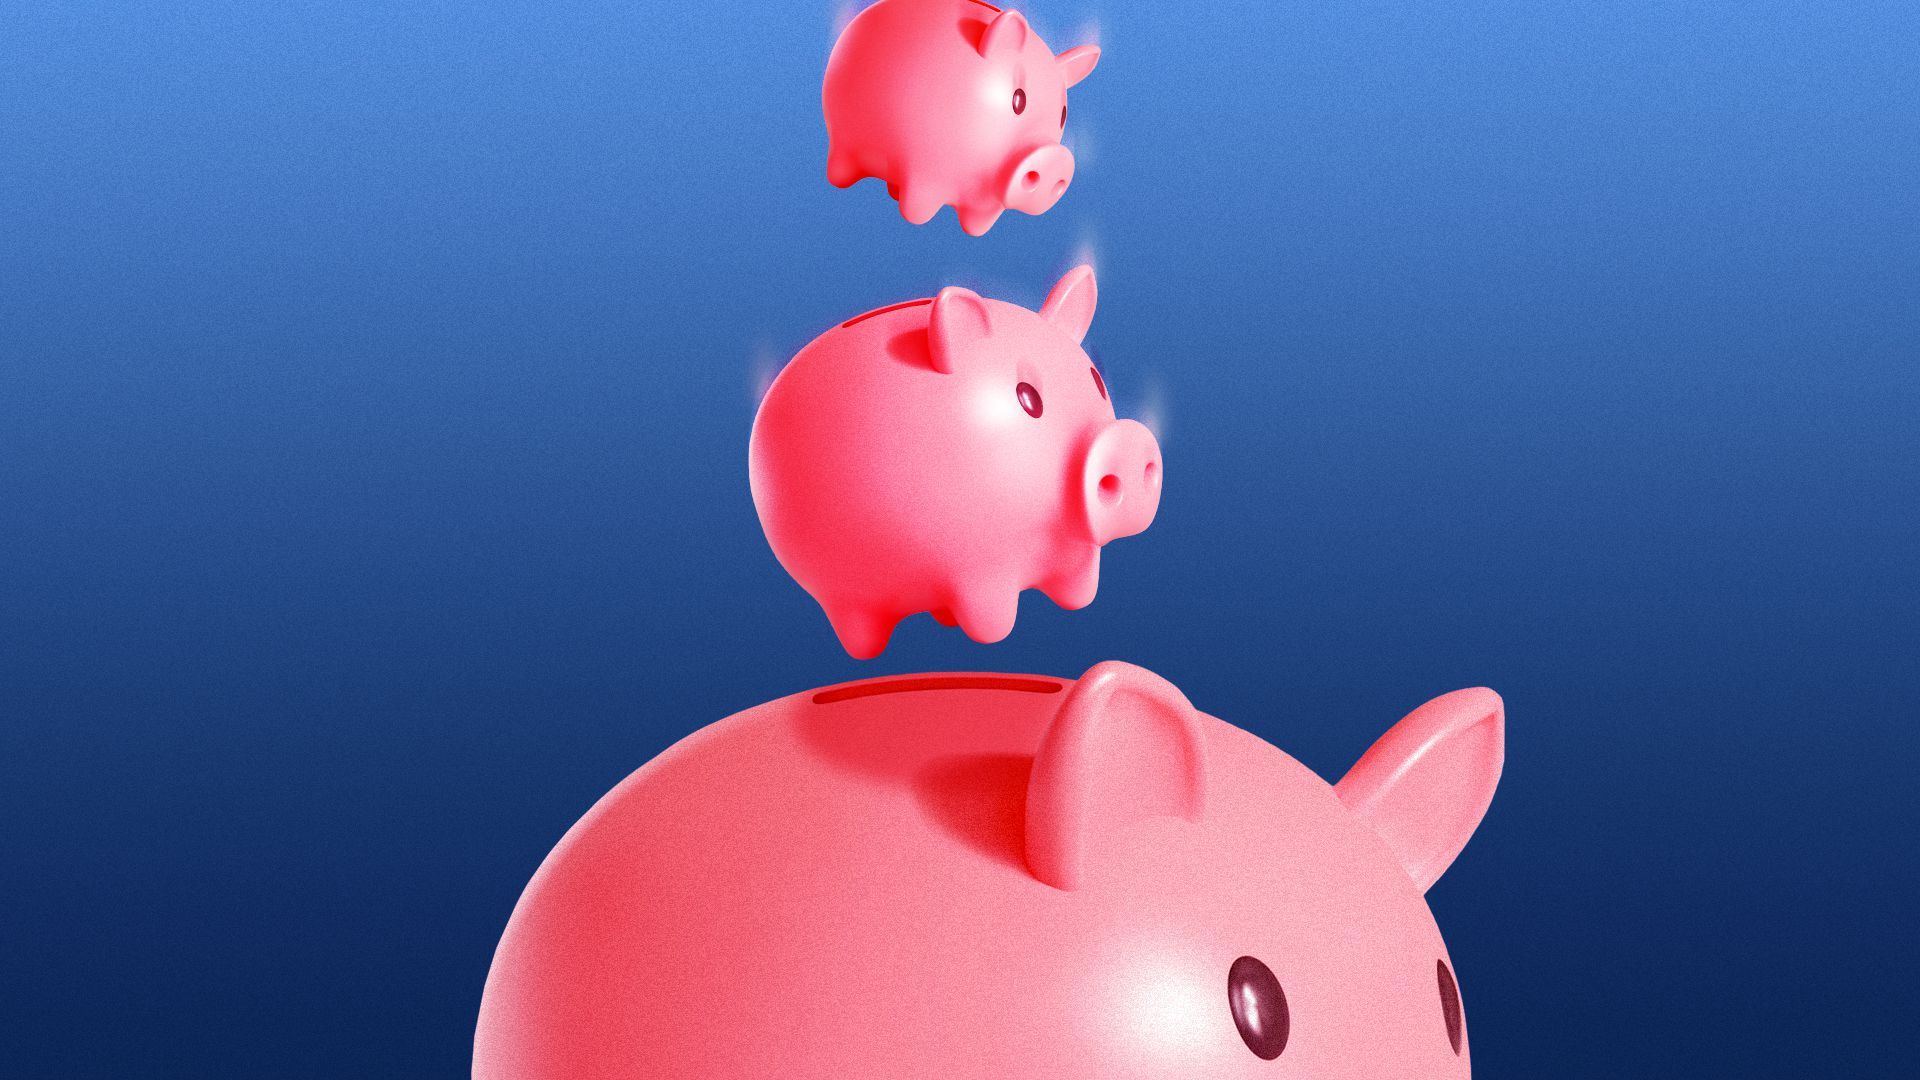 Illustration of a piggy bank with gradually smaller piggy banks falling into it